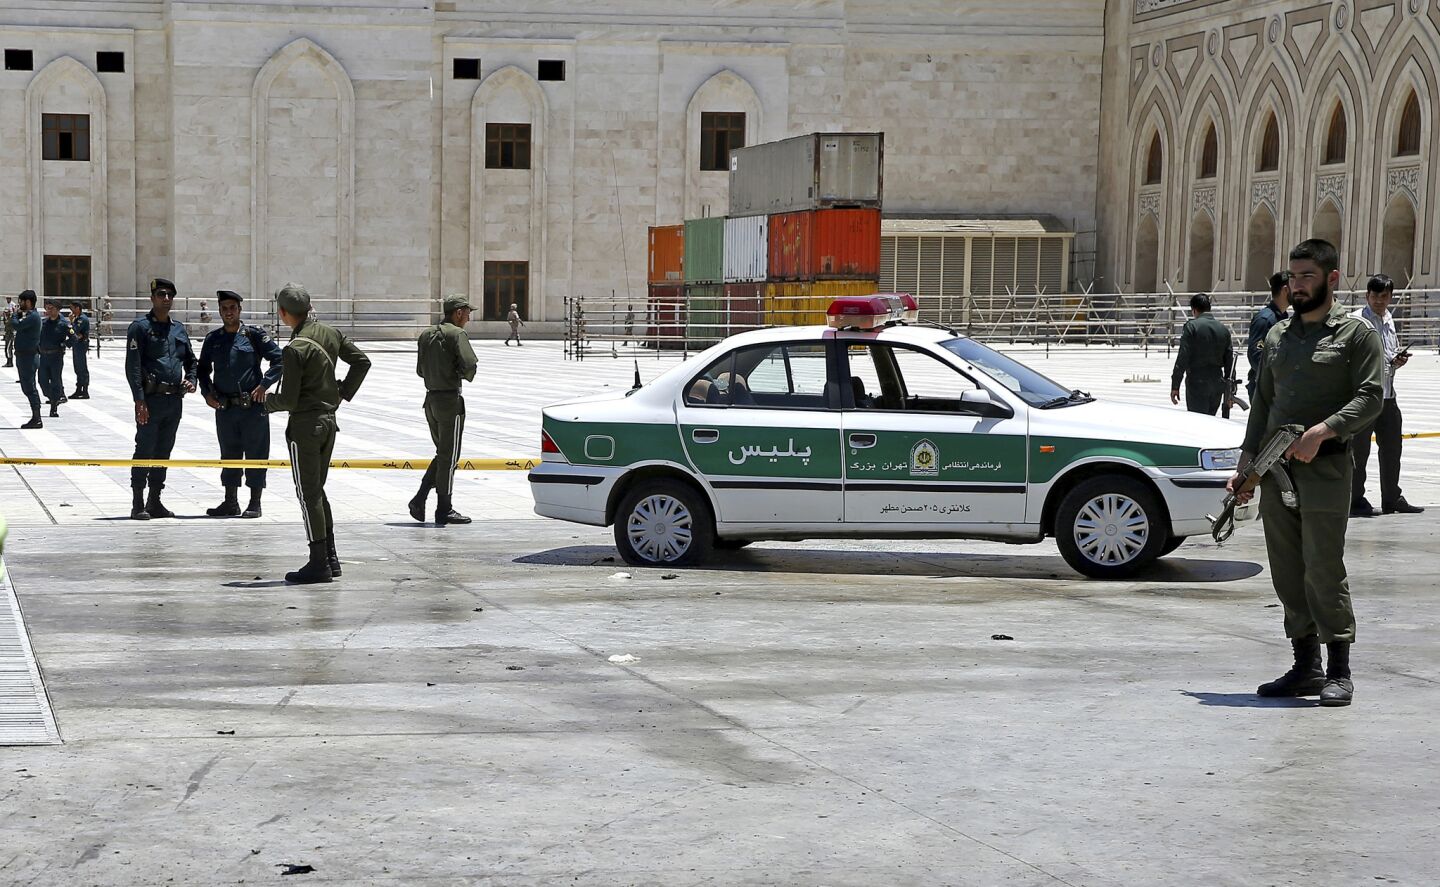 Police officers patrol around the shrine of late Iranian revolutionary founder Ayatollah Khomeini, after an attack.